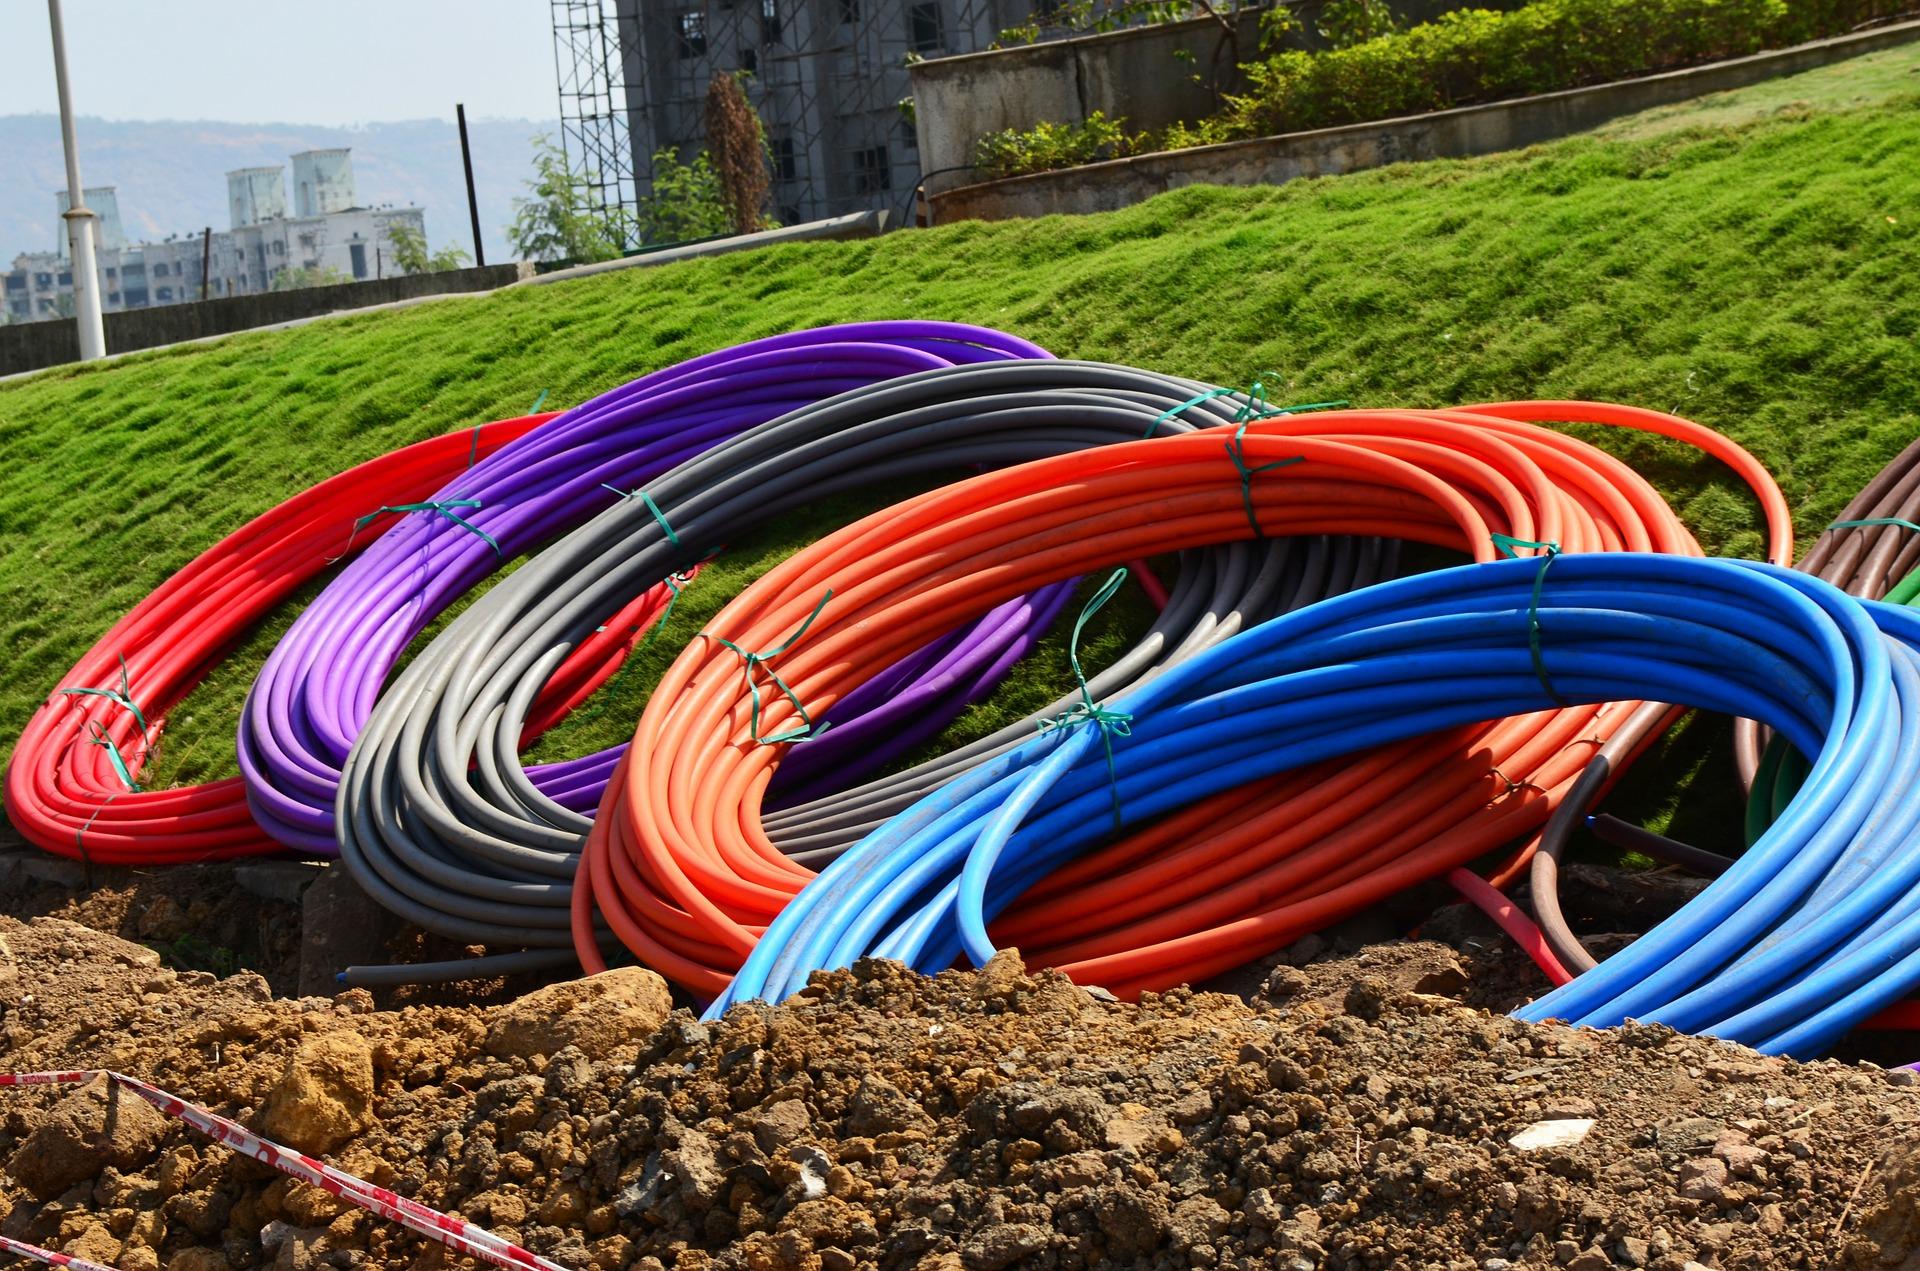 Kenya's total fibre optic coverage is about 10,000 kilometres as of August 2022